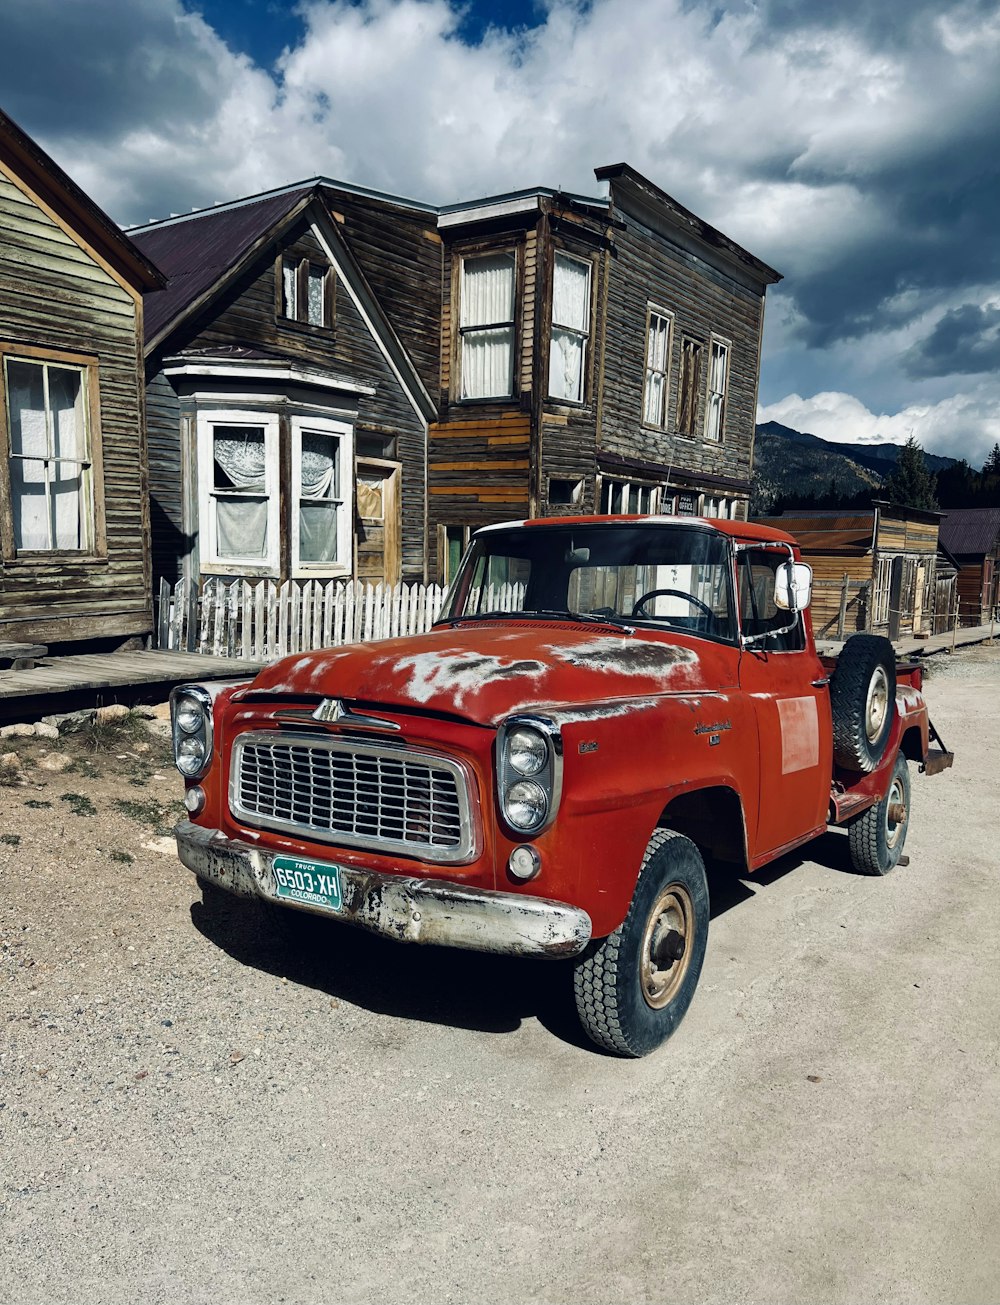 an old red truck parked in front of a house